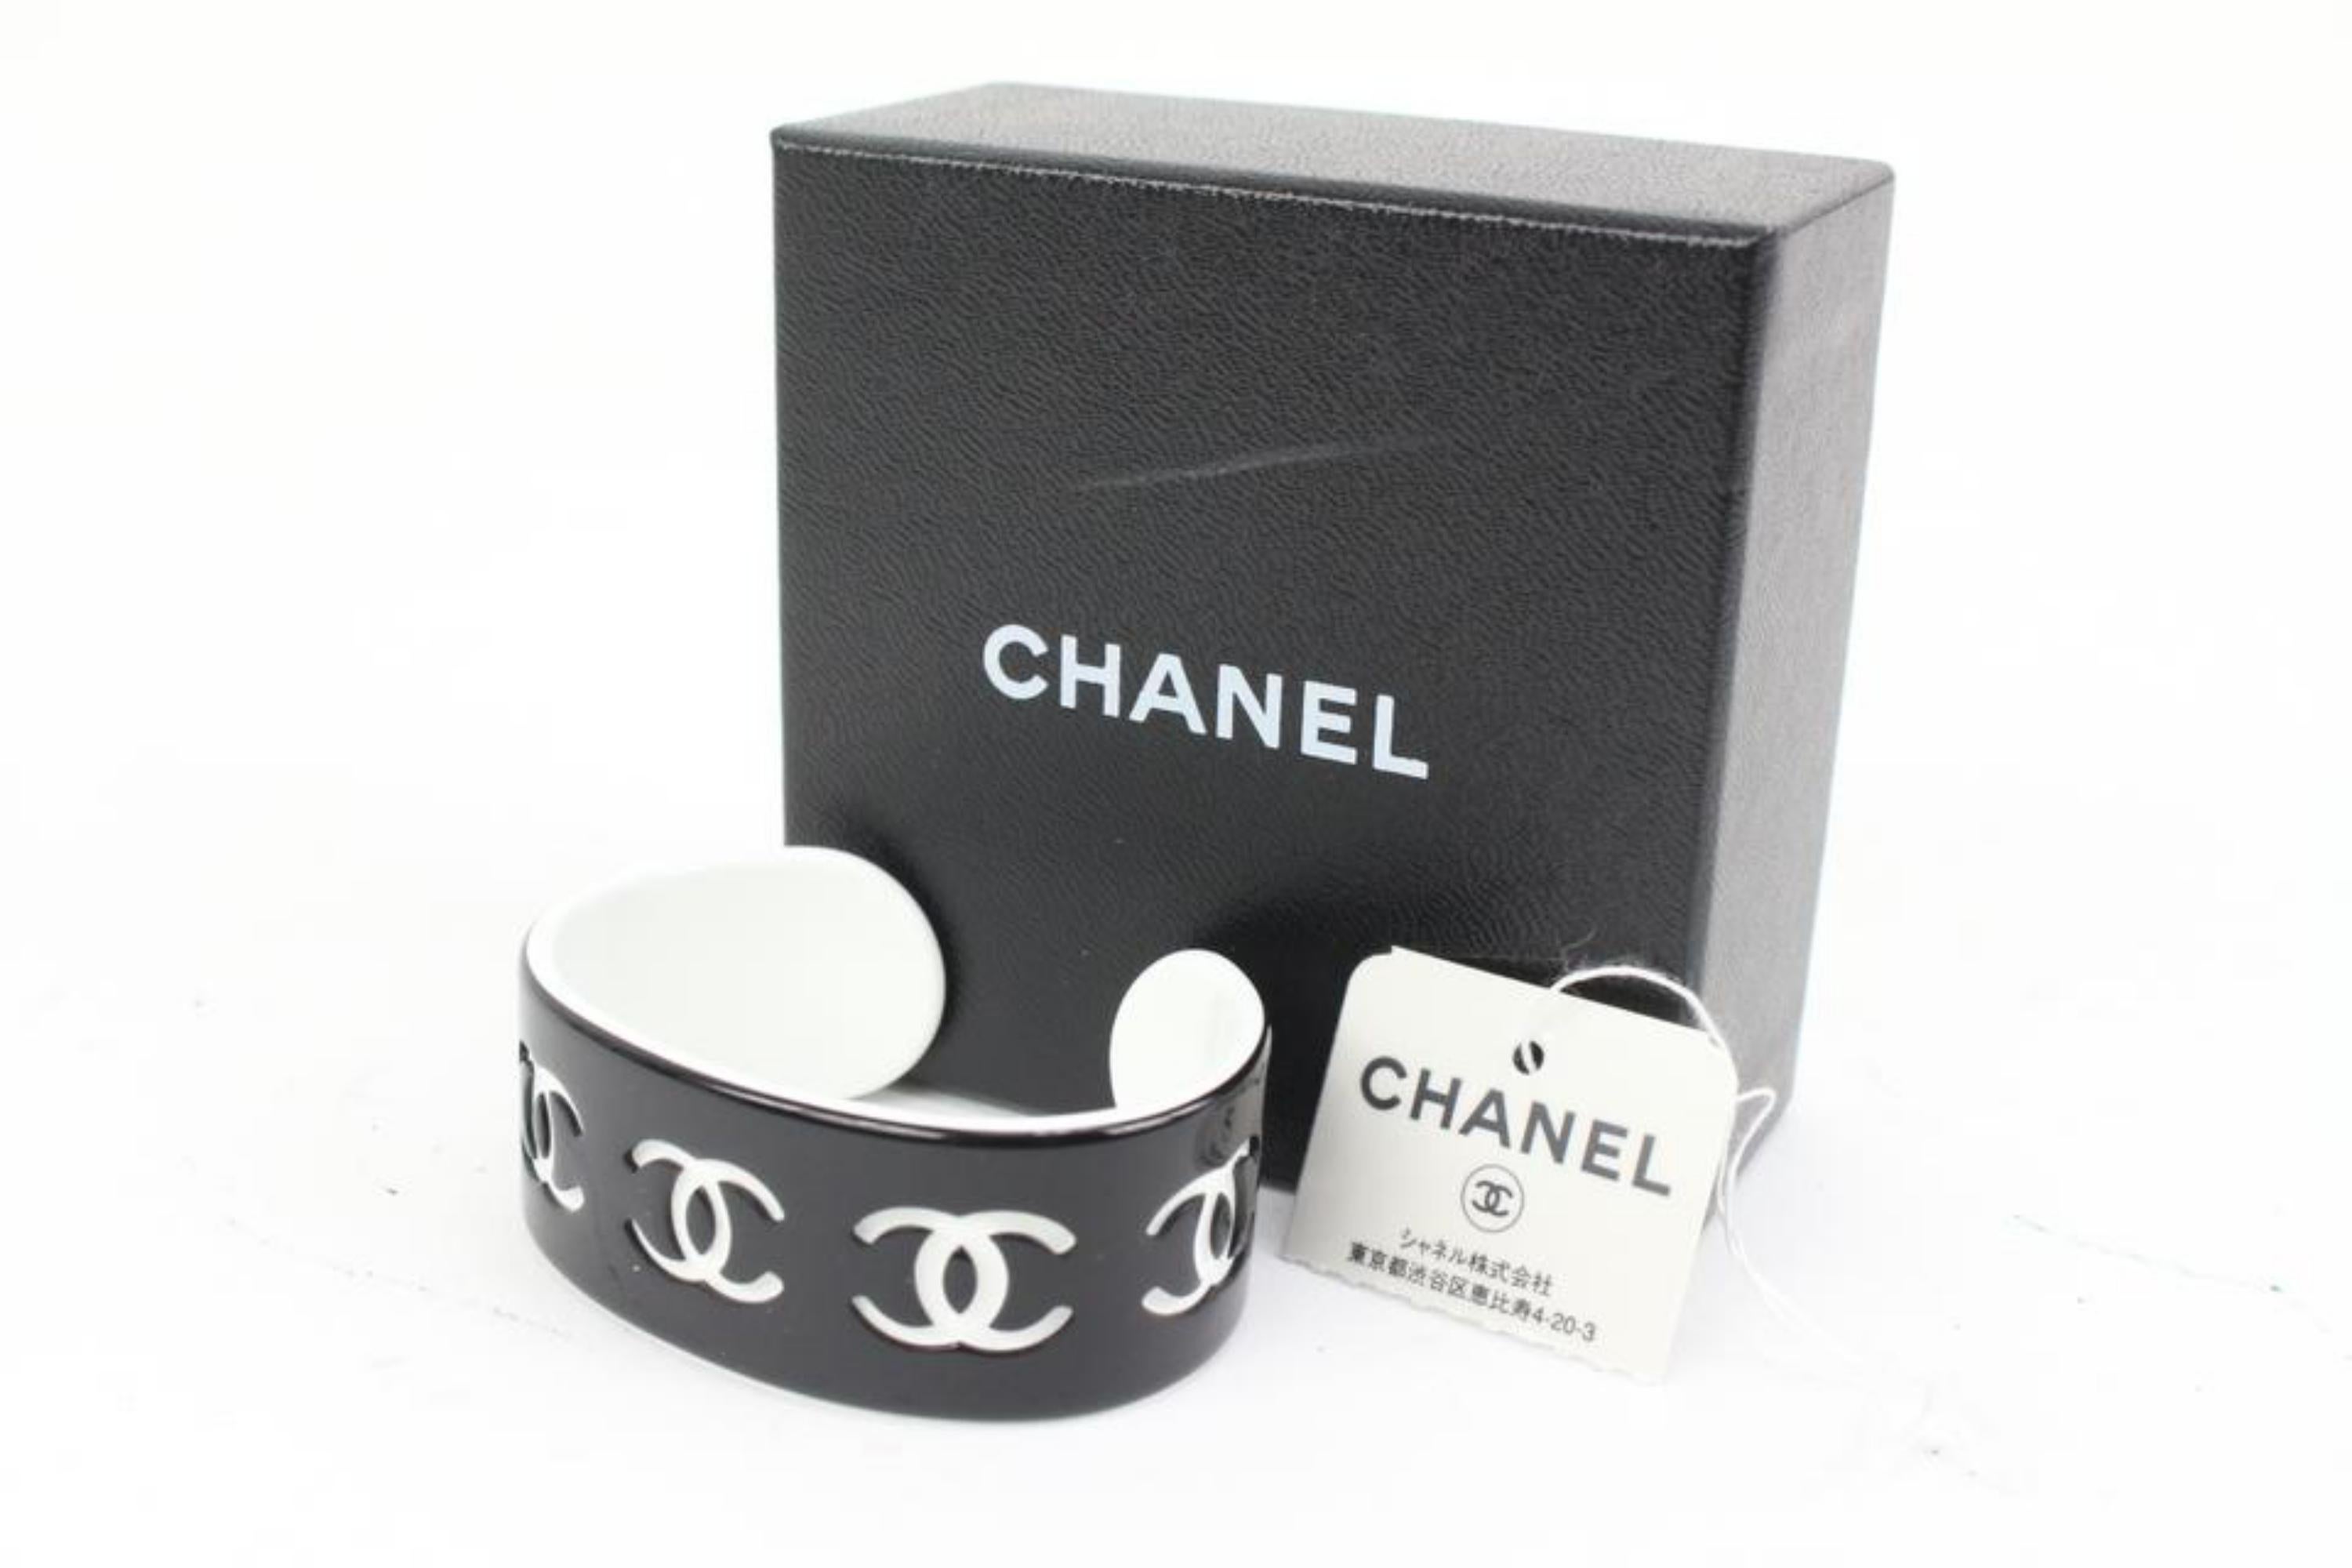 Chanel 02P Black x White CC Logo Acrylic Cuff Bracelet Bangle 70cz418s
Date Code/Serial Number: 02 P
Made In: France
Measurements: Length:  2.3